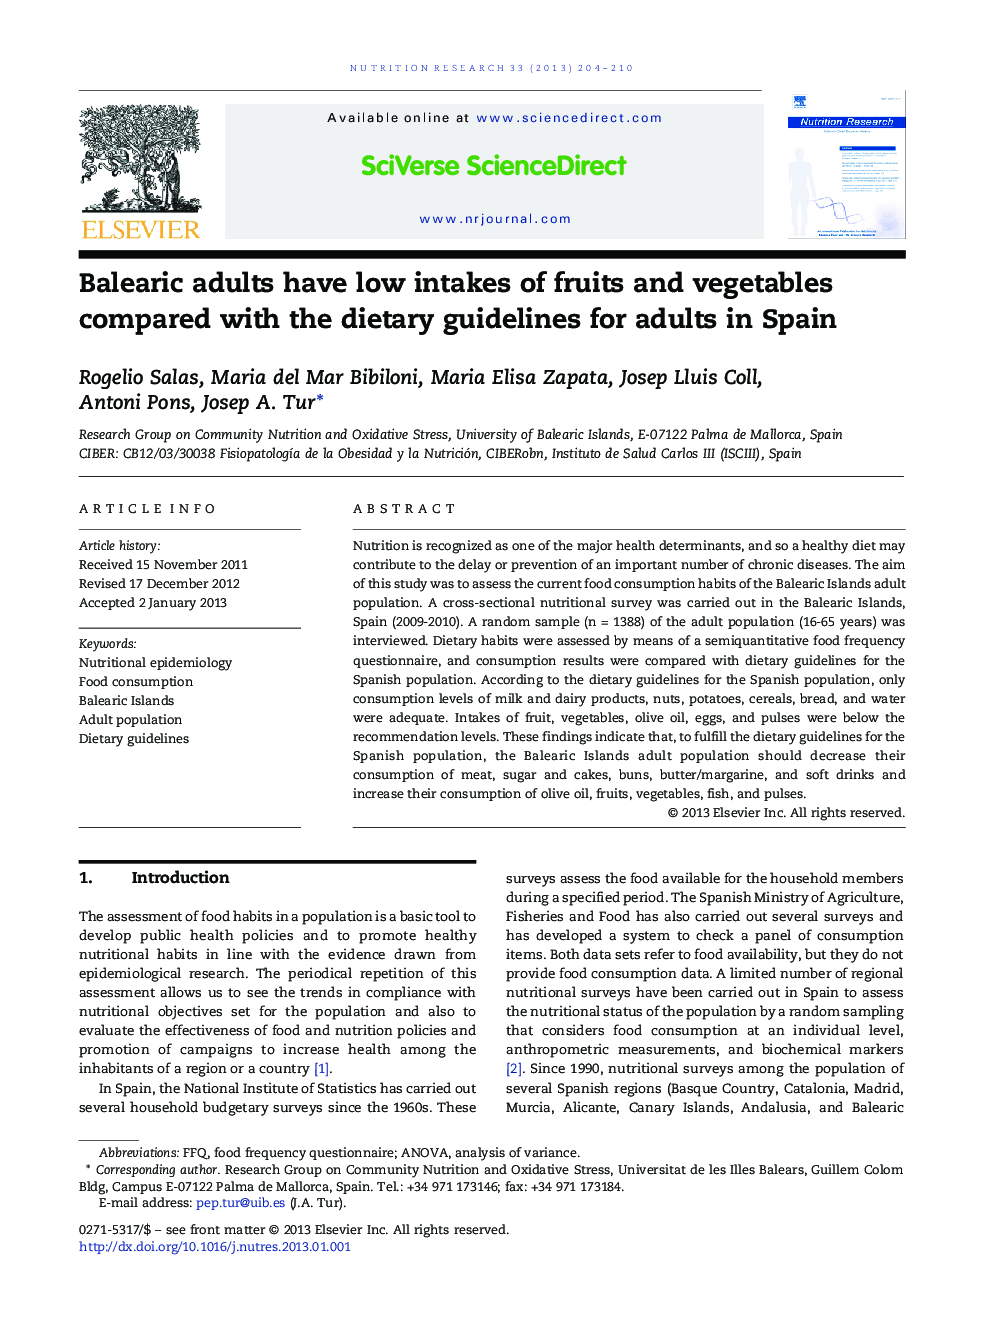 Balearic adults have low intakes of fruits and vegetables compared with the dietary guidelines for adults in Spain